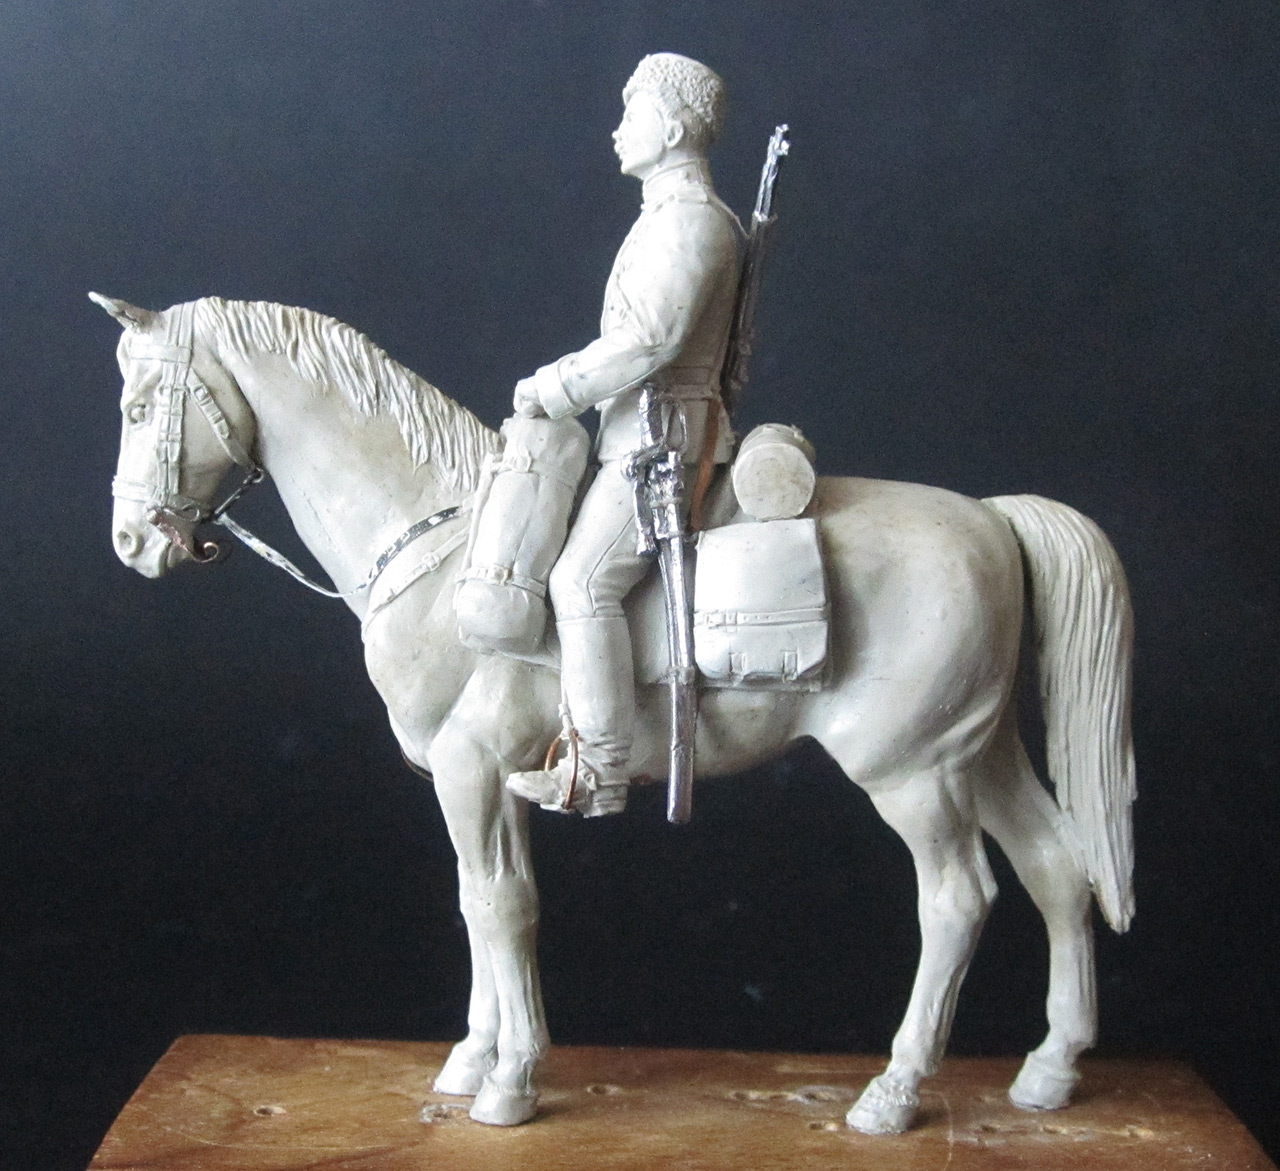 Sculpture: Dragoons private, 1897-1907, photo #1